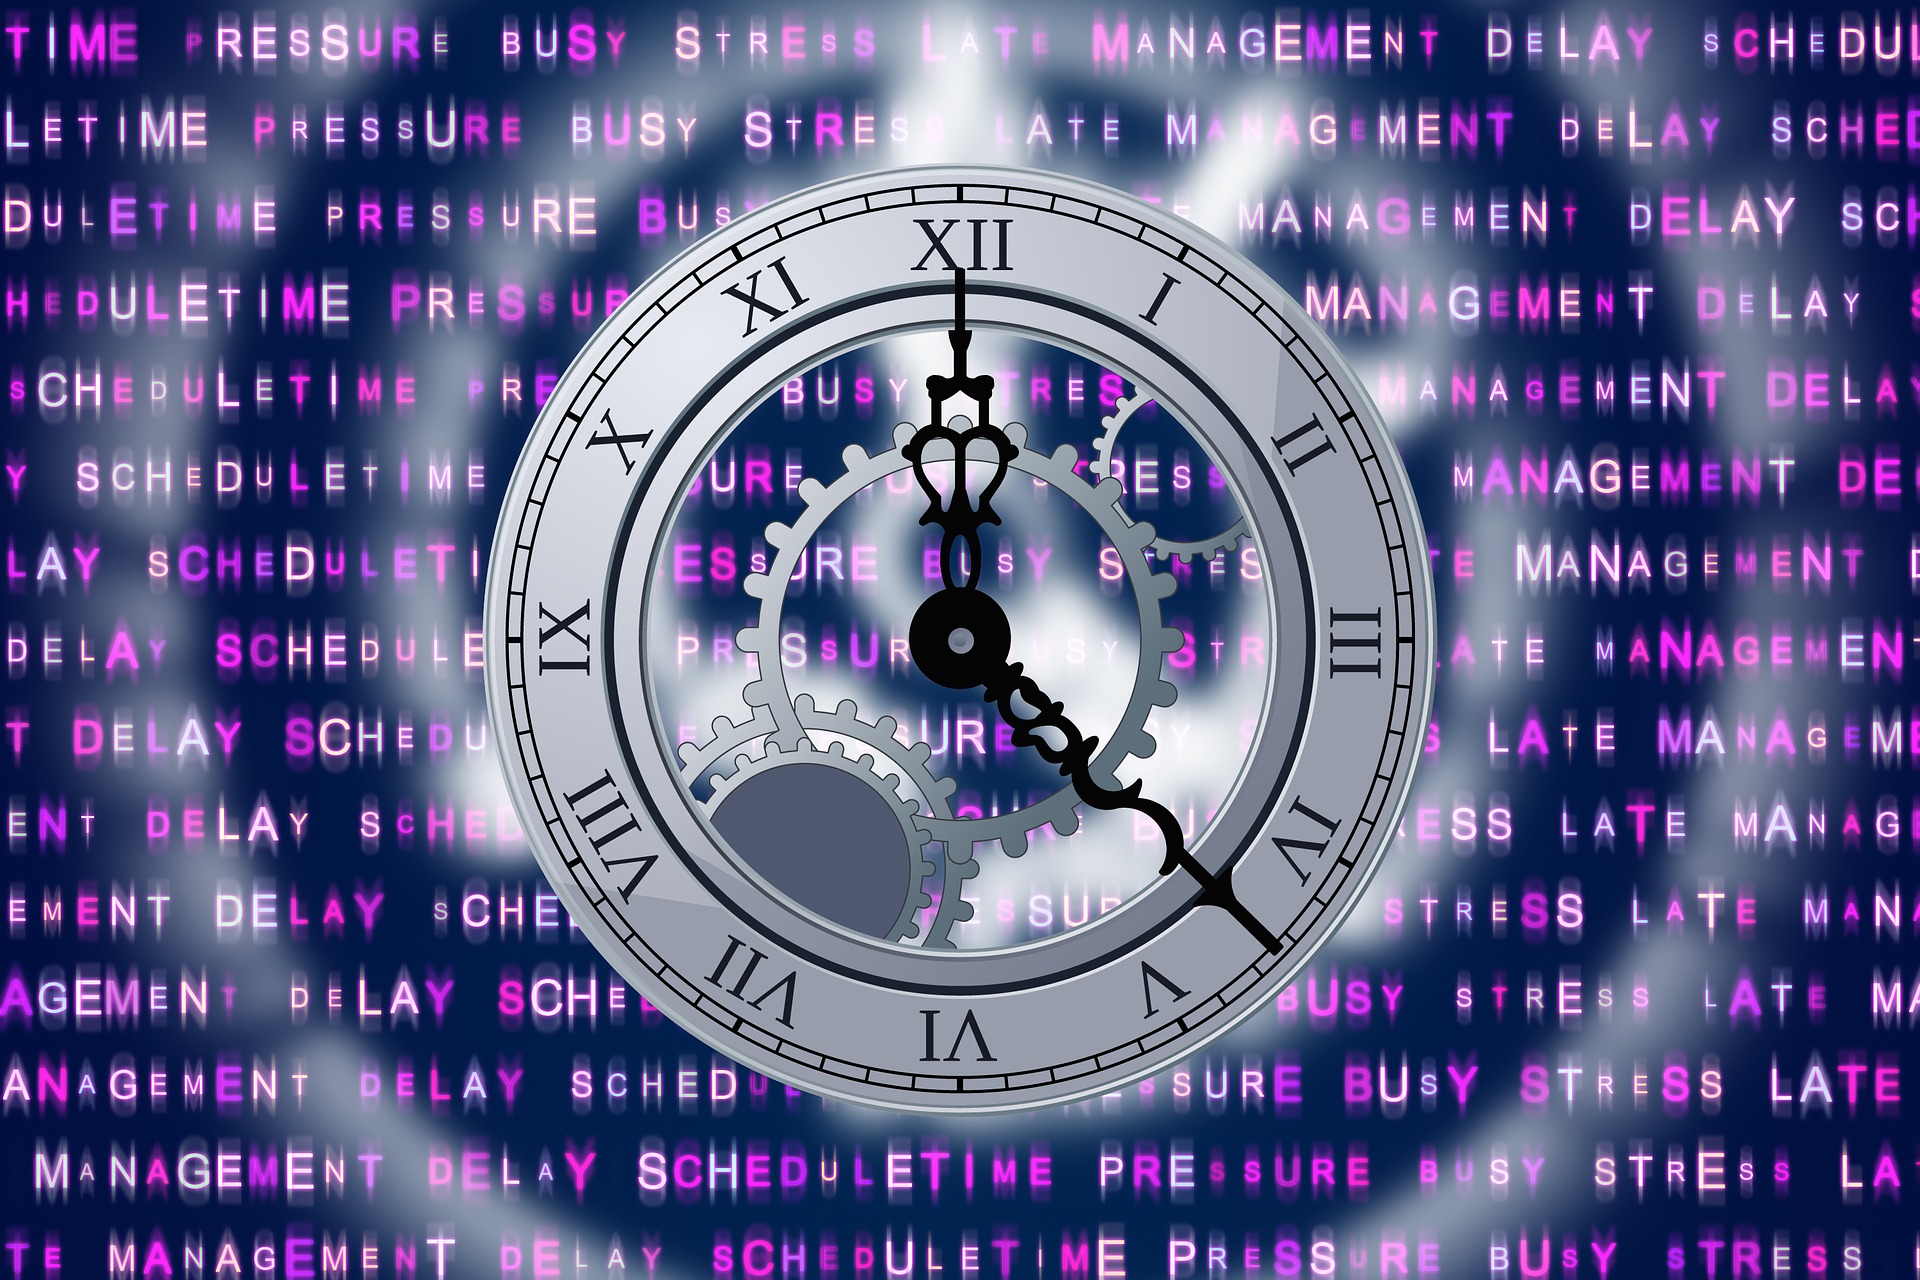 Against a purple-pink background of words like 'delay', 'stress', 'busy', 'pressure', we see a metal clock face. The clock face is clear and appears to emanate a positive light.